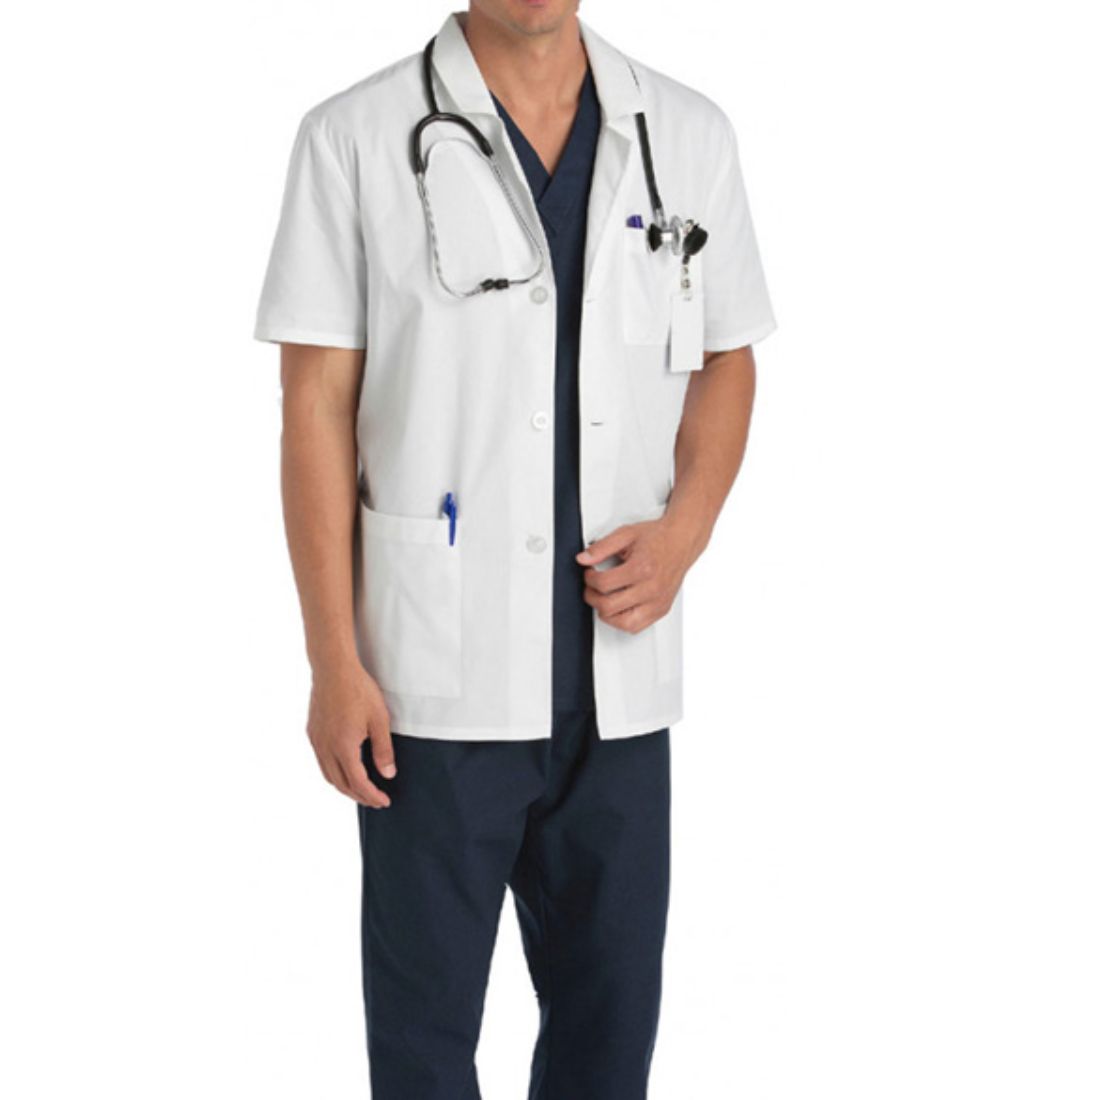 Buy A white Half sleeves coat or lab coat i.e. apron is worn by professionals in the medical field